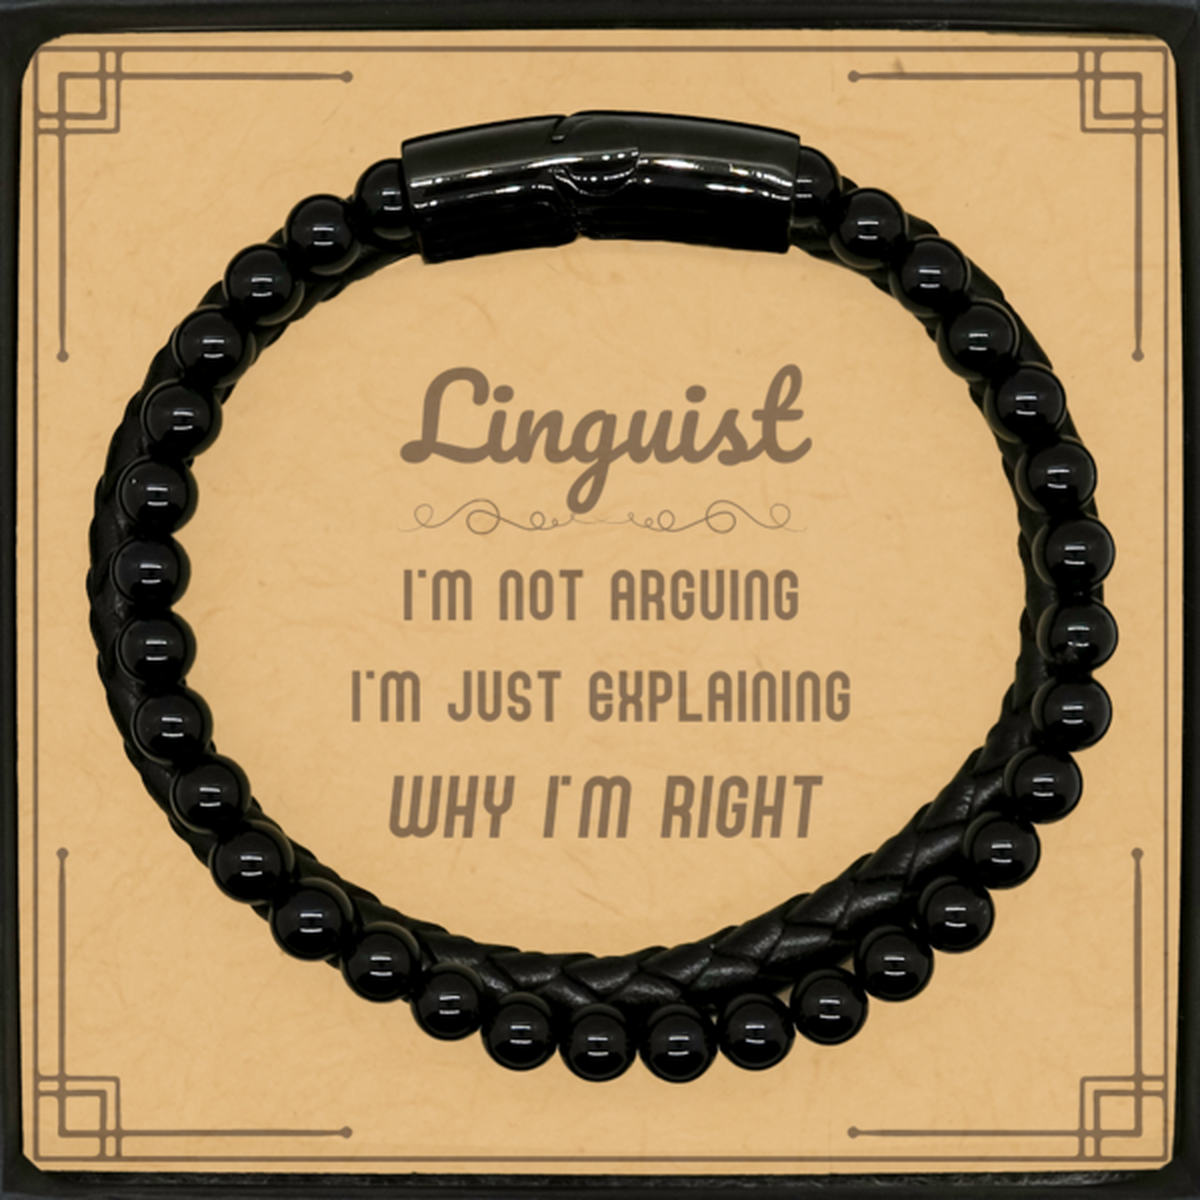 Linguist I'm not Arguing. I'm Just Explaining Why I'm RIGHT Stone Leather Bracelets, Funny Saying Quote Linguist Gifts For Linguist Message Card Graduation Birthday Christmas Gifts for Men Women Coworker